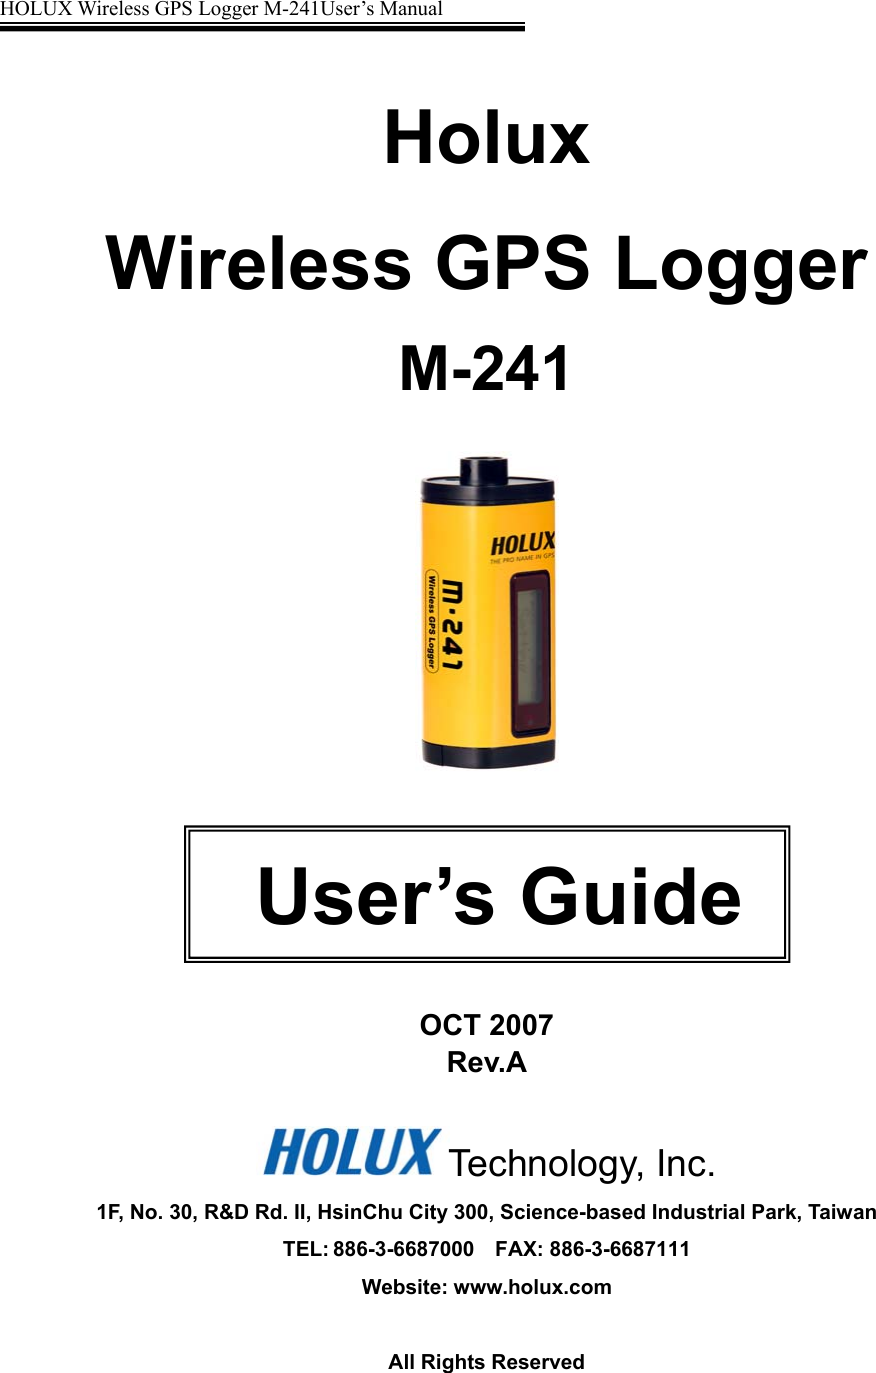 HOLUX Wireless GPS Logger M-241User’s Manual                            Holux  Wireless GPS Logger M-241       OCT 2007 Rev.A  Technology, Inc. 1F, No. 30, R&amp;D Rd. II, HsinChu City 300, Science-based Industrial Park, Taiwan TEL: 886-3-6687000  FAX: 886-3-6687111 Website: www.holux.com  All Rights Reserved   User’s Guide 